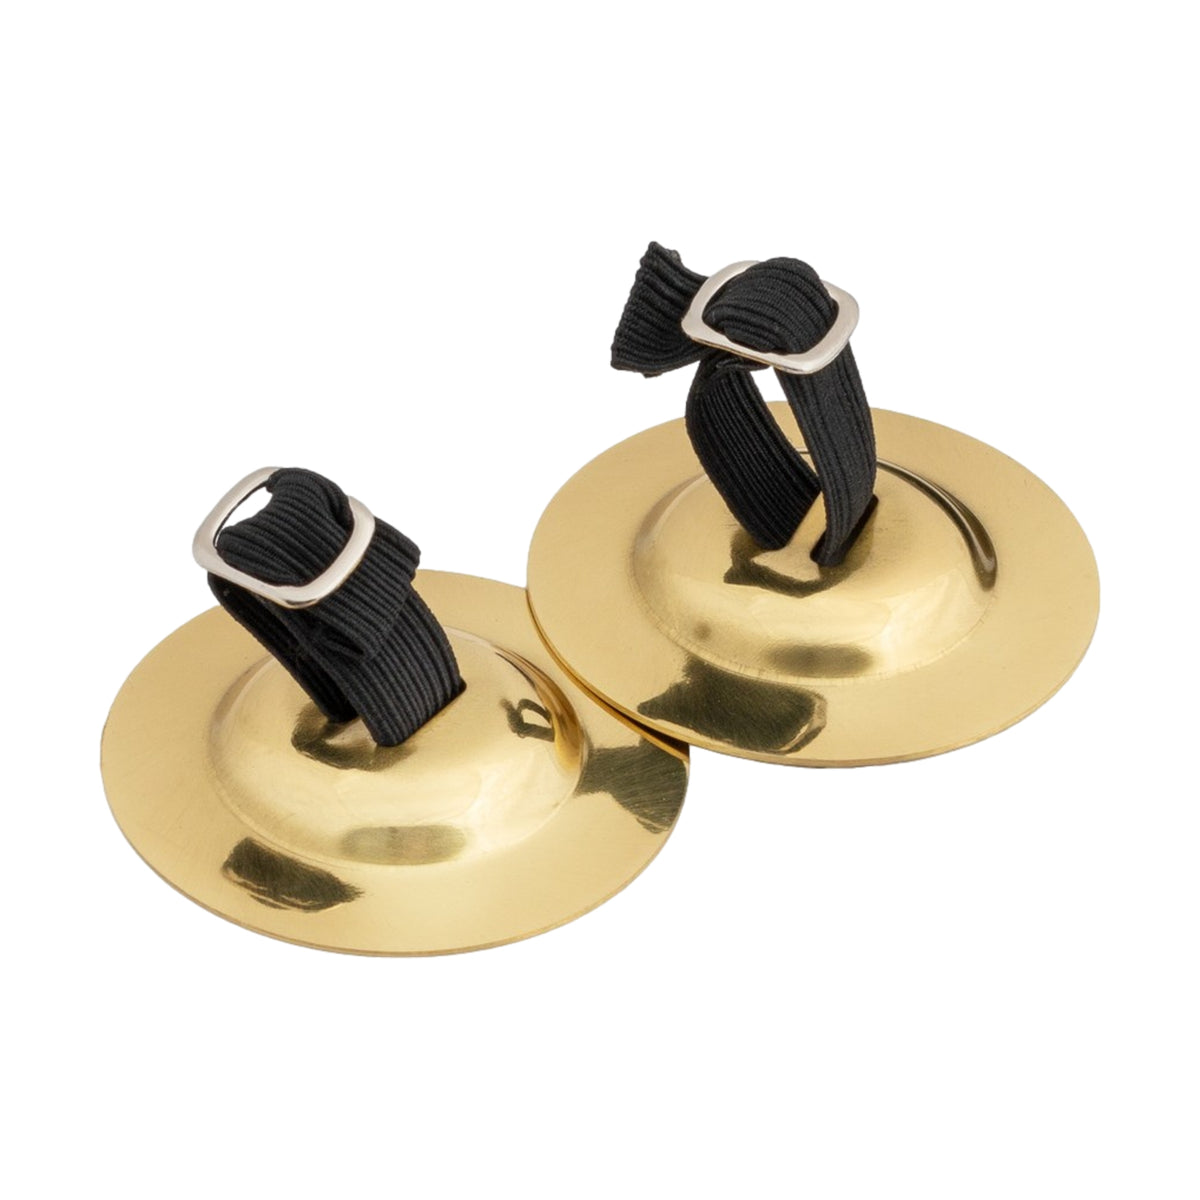 Pair of Brass Finger Cymbals